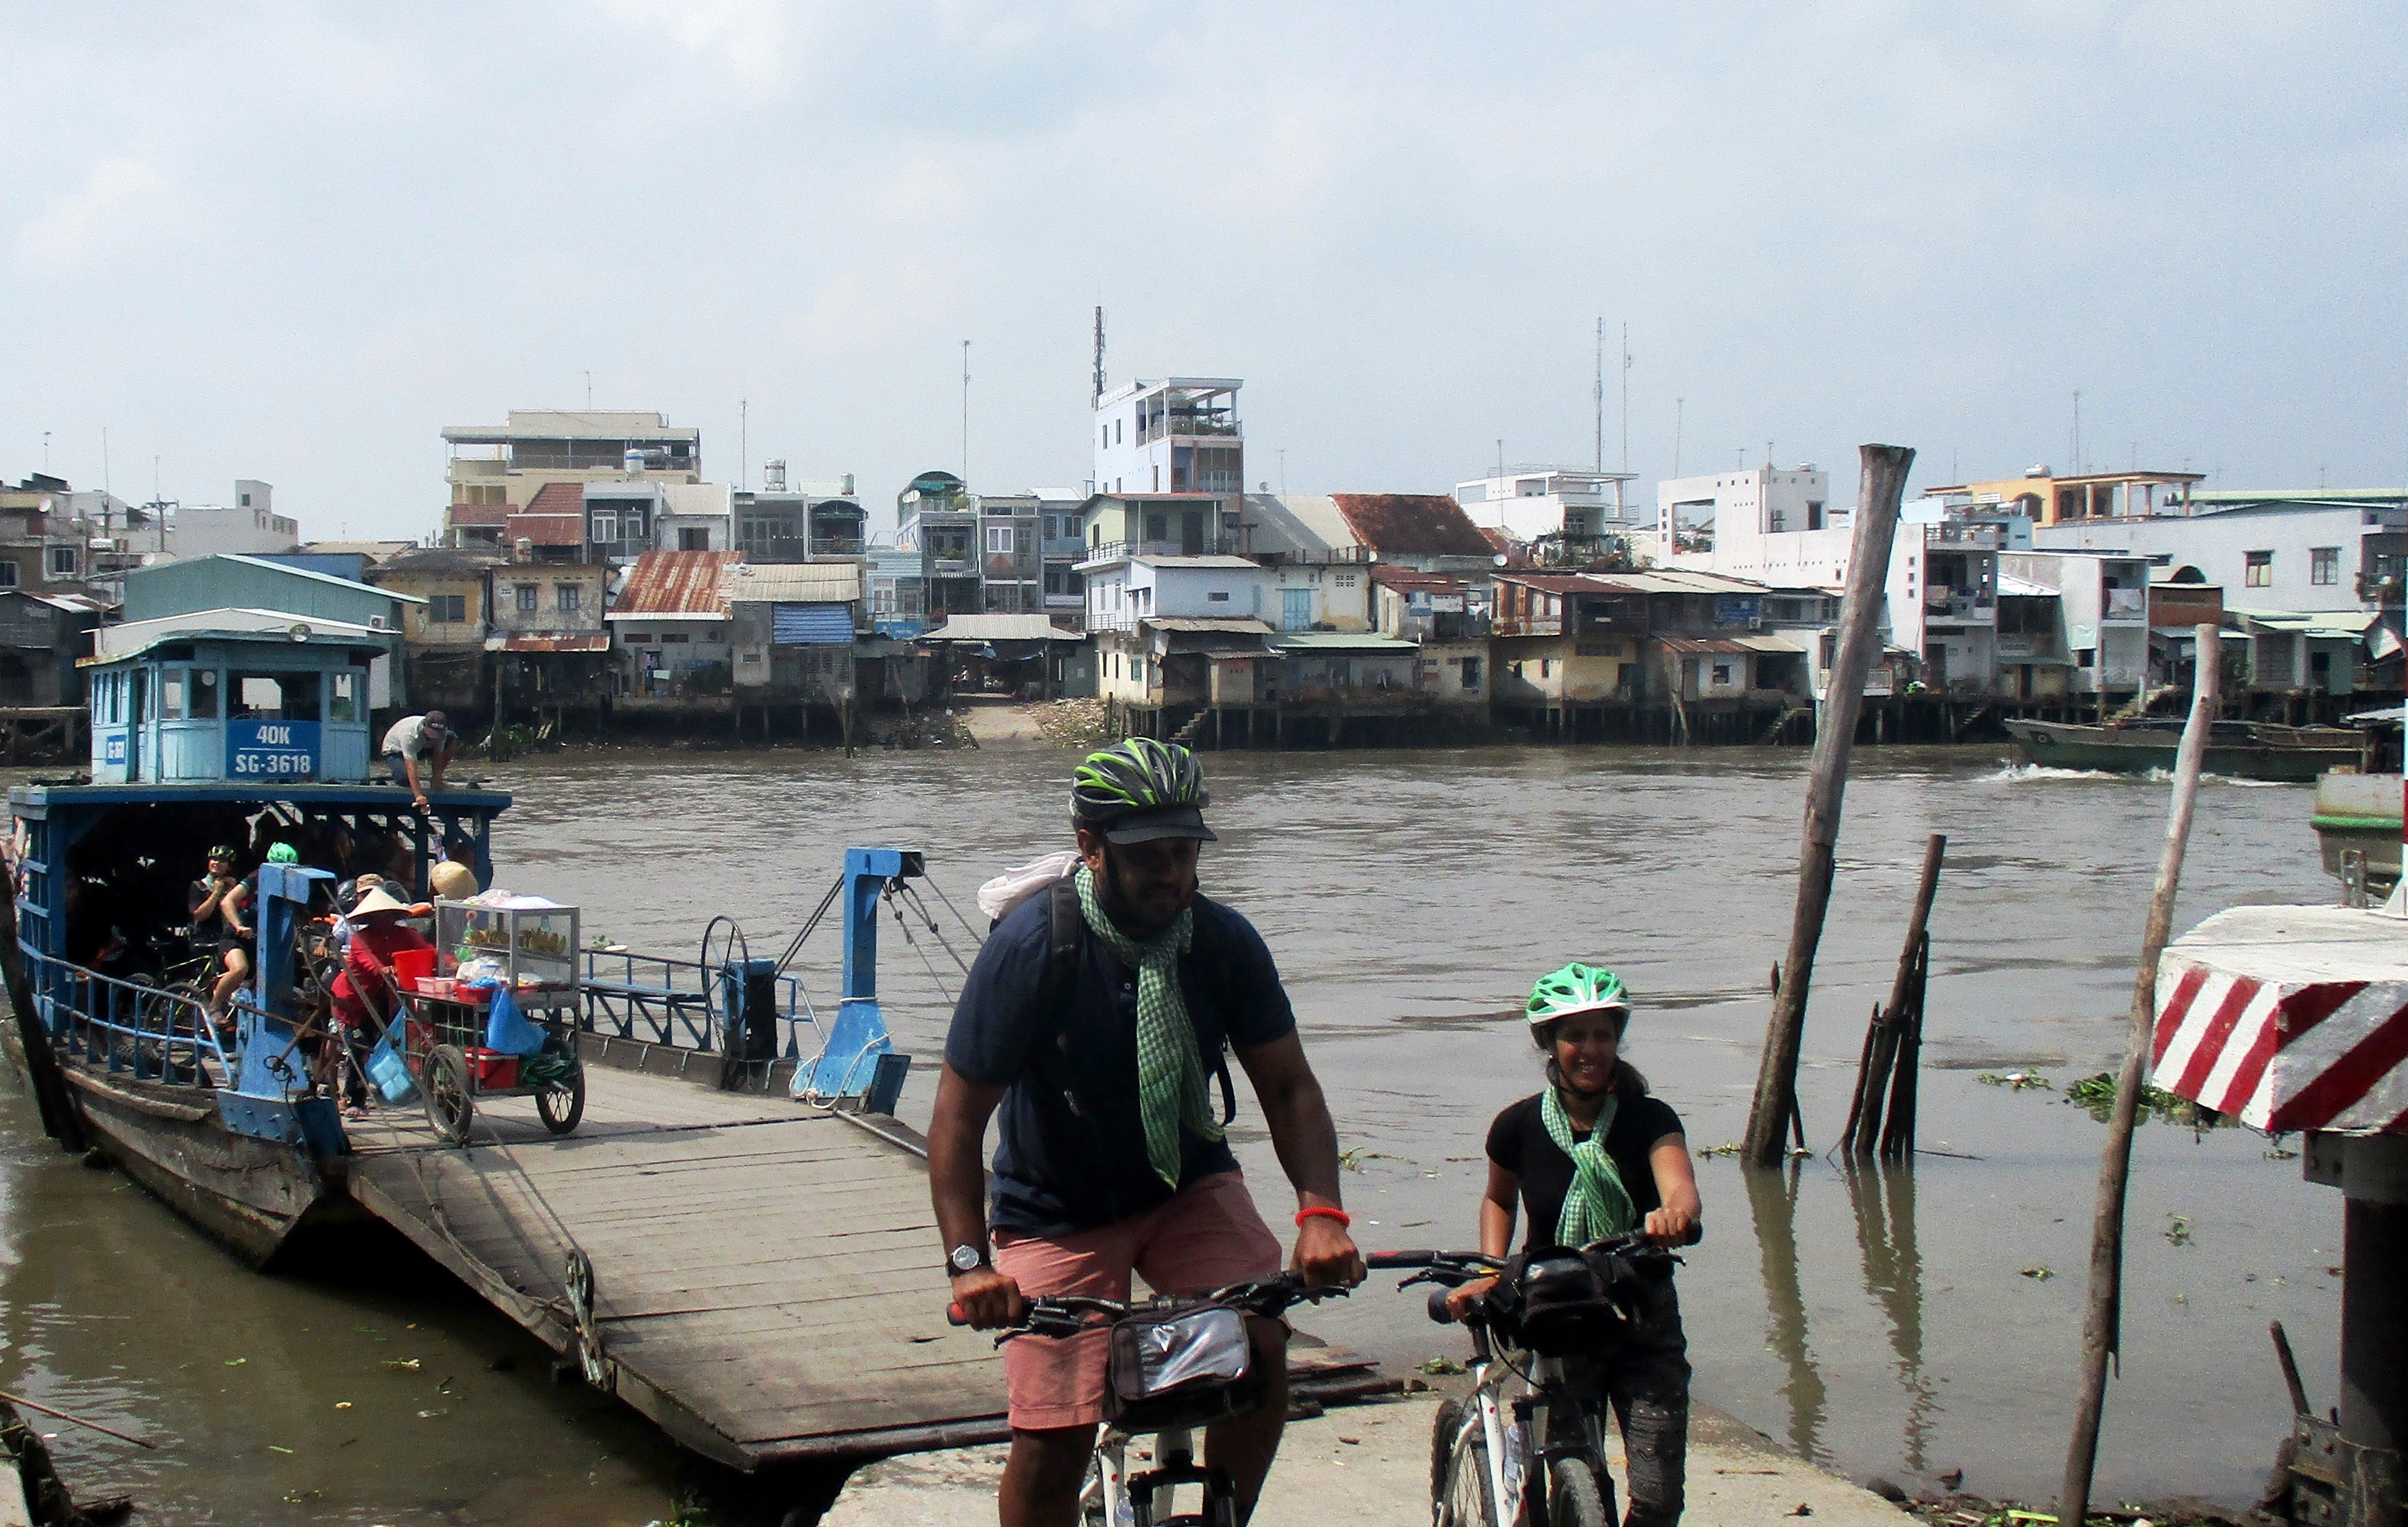 MEKONG DELTA HOMESTAY BY KAYAK AND BIKE:02 DAYS ACTIVITIES